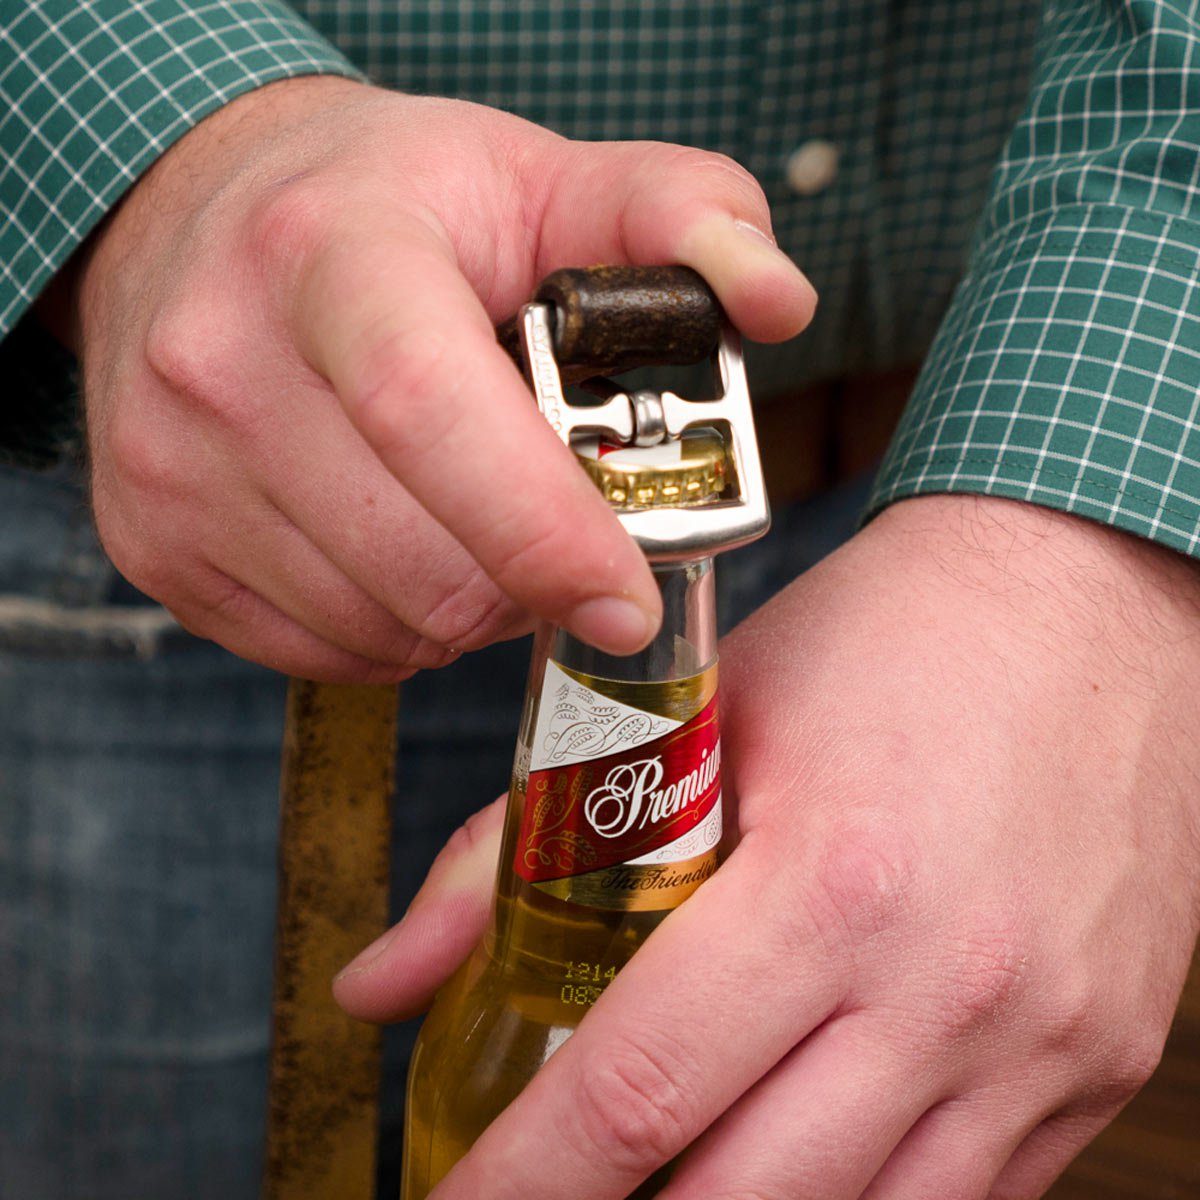 Opening a bottle with belt